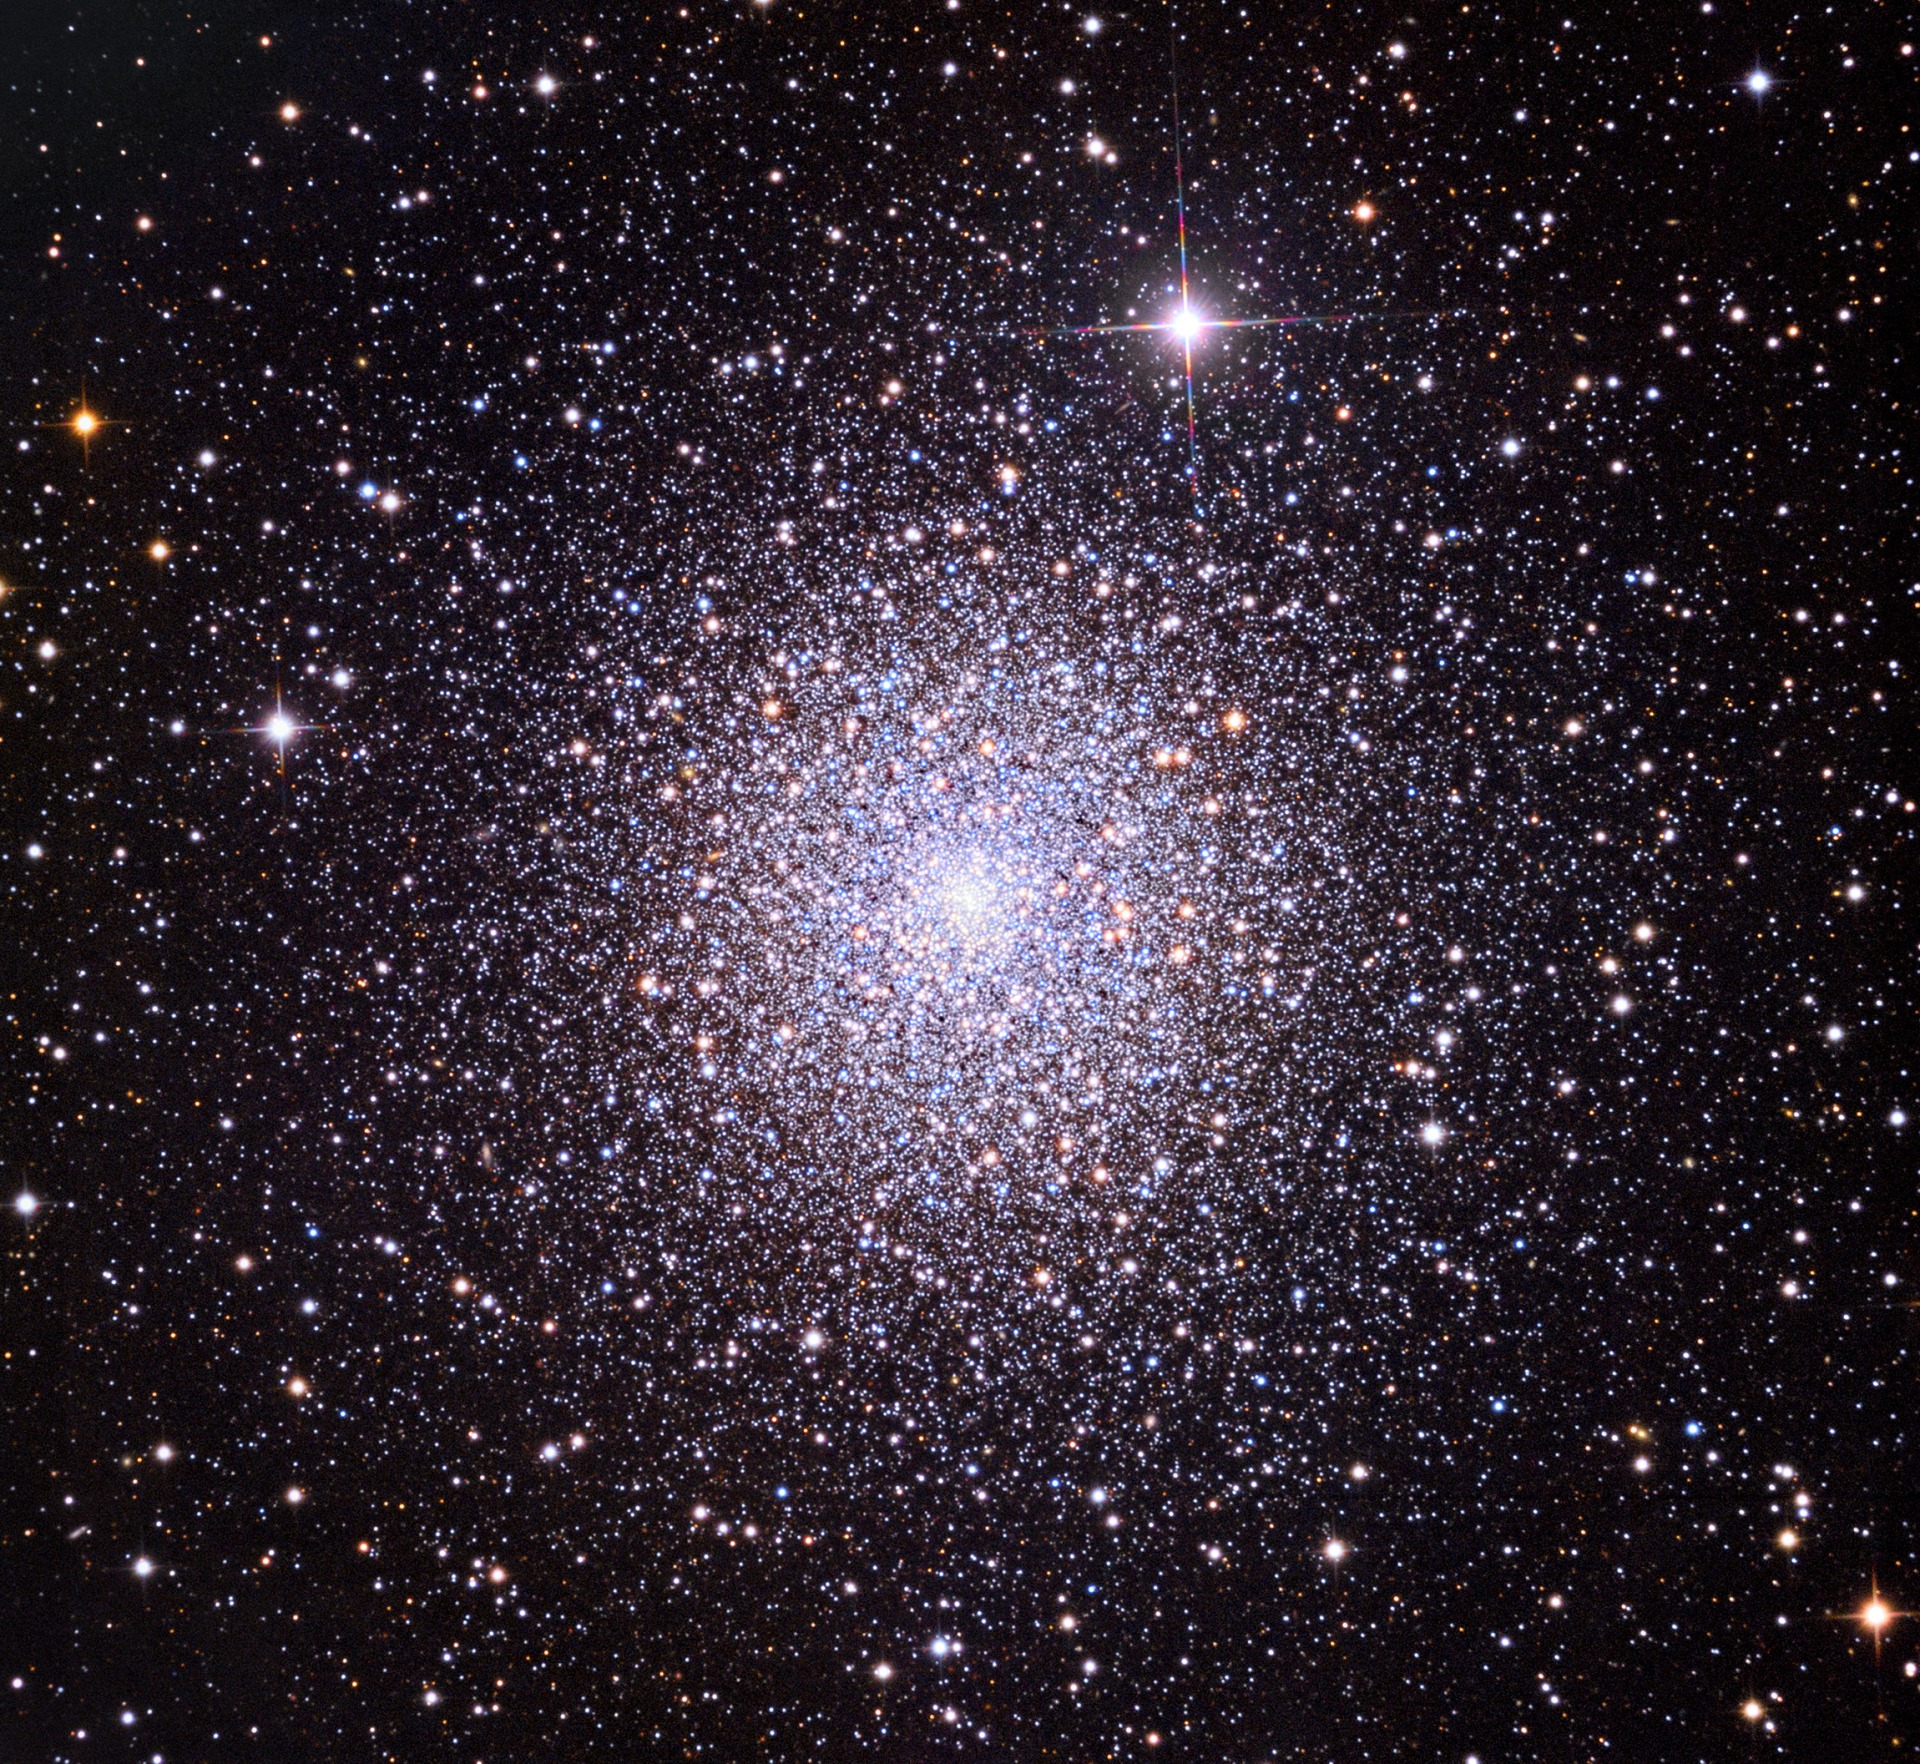 Image of M15 is a globular cluster - a spherical collection of stars that orbits a galactic core, in the constellation Pegasus. 